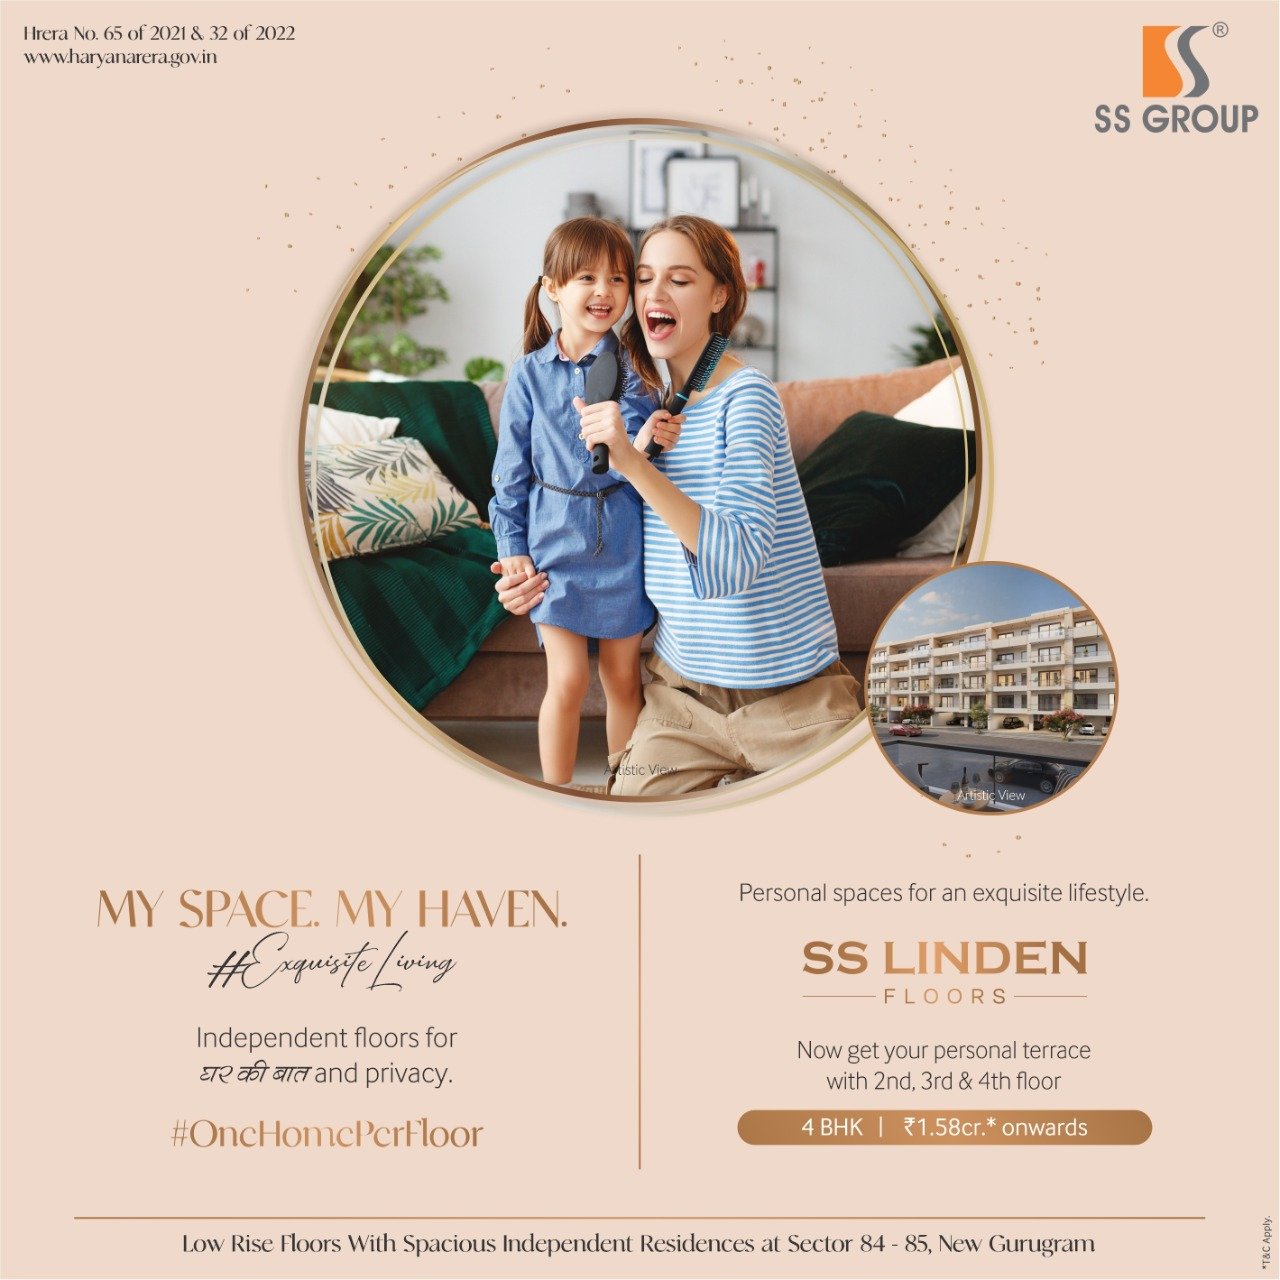 Now get your personal terrance with 2nd, 3rd, and 4th floor at SS Linden Floors, Gurgaon Update